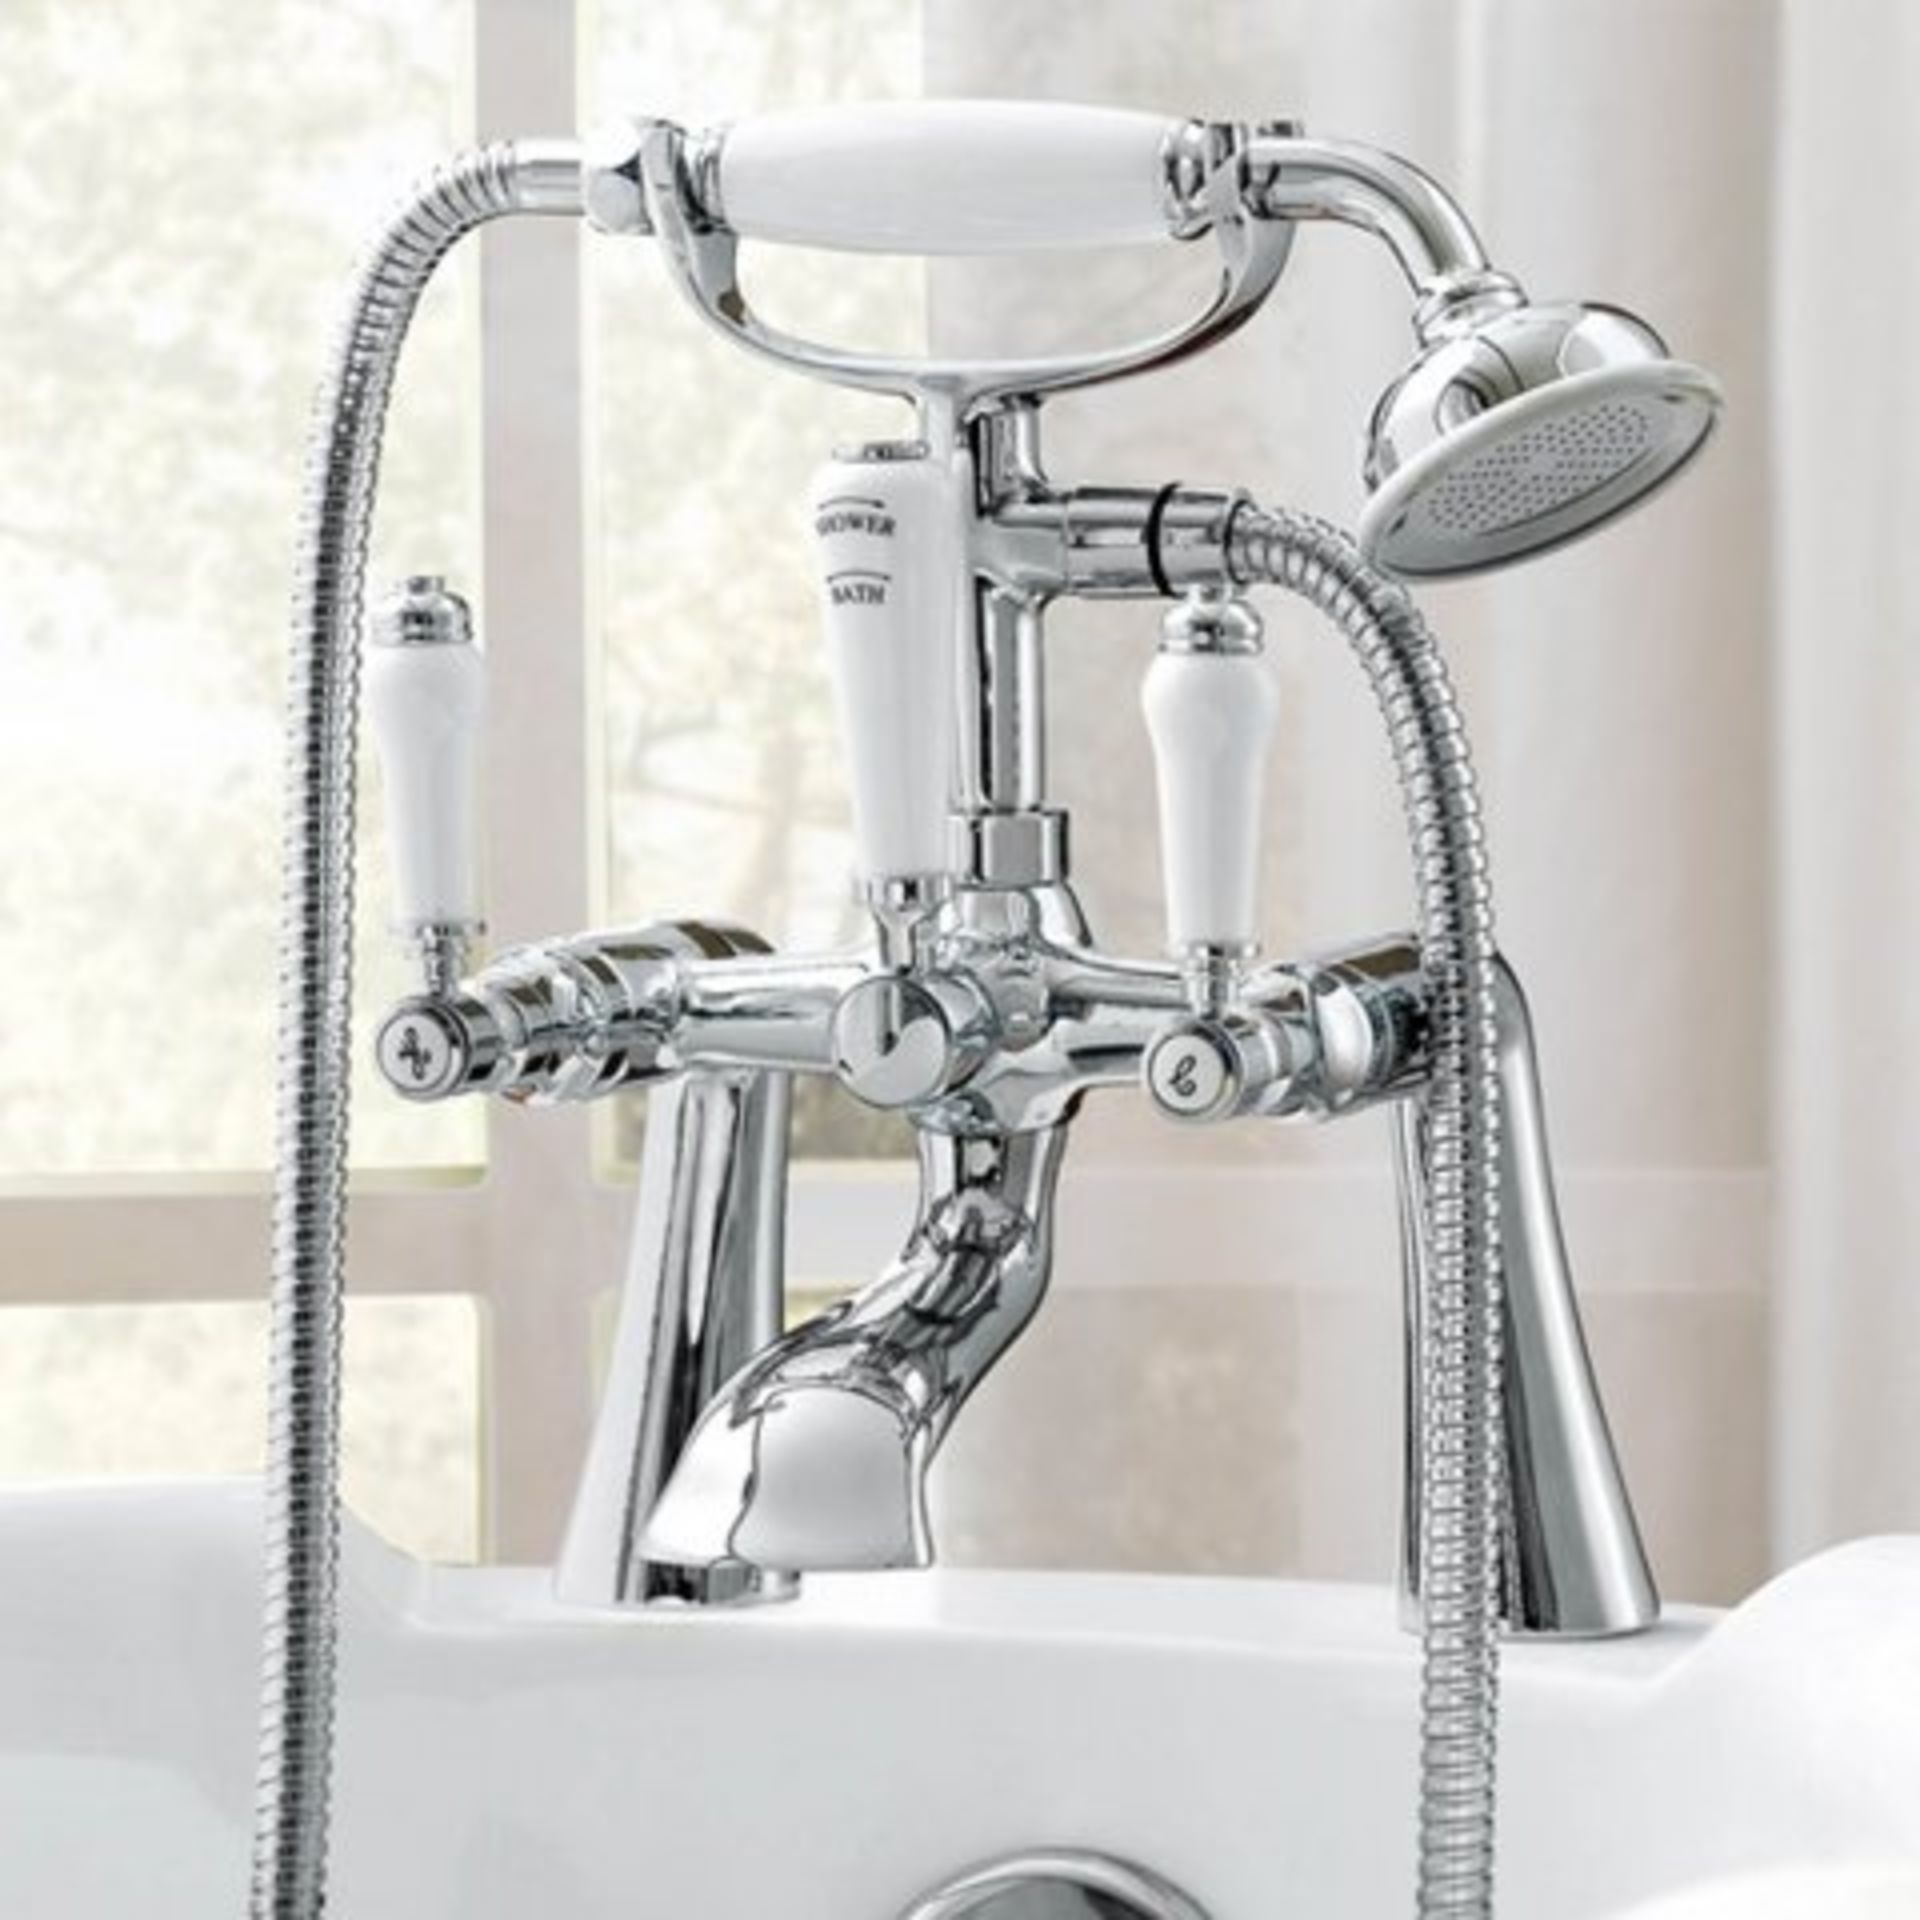 (I61) Regal Chrome Traditional Bath Mixer Lever Tap with Hand Held Shower RRP £199.99 Vintage